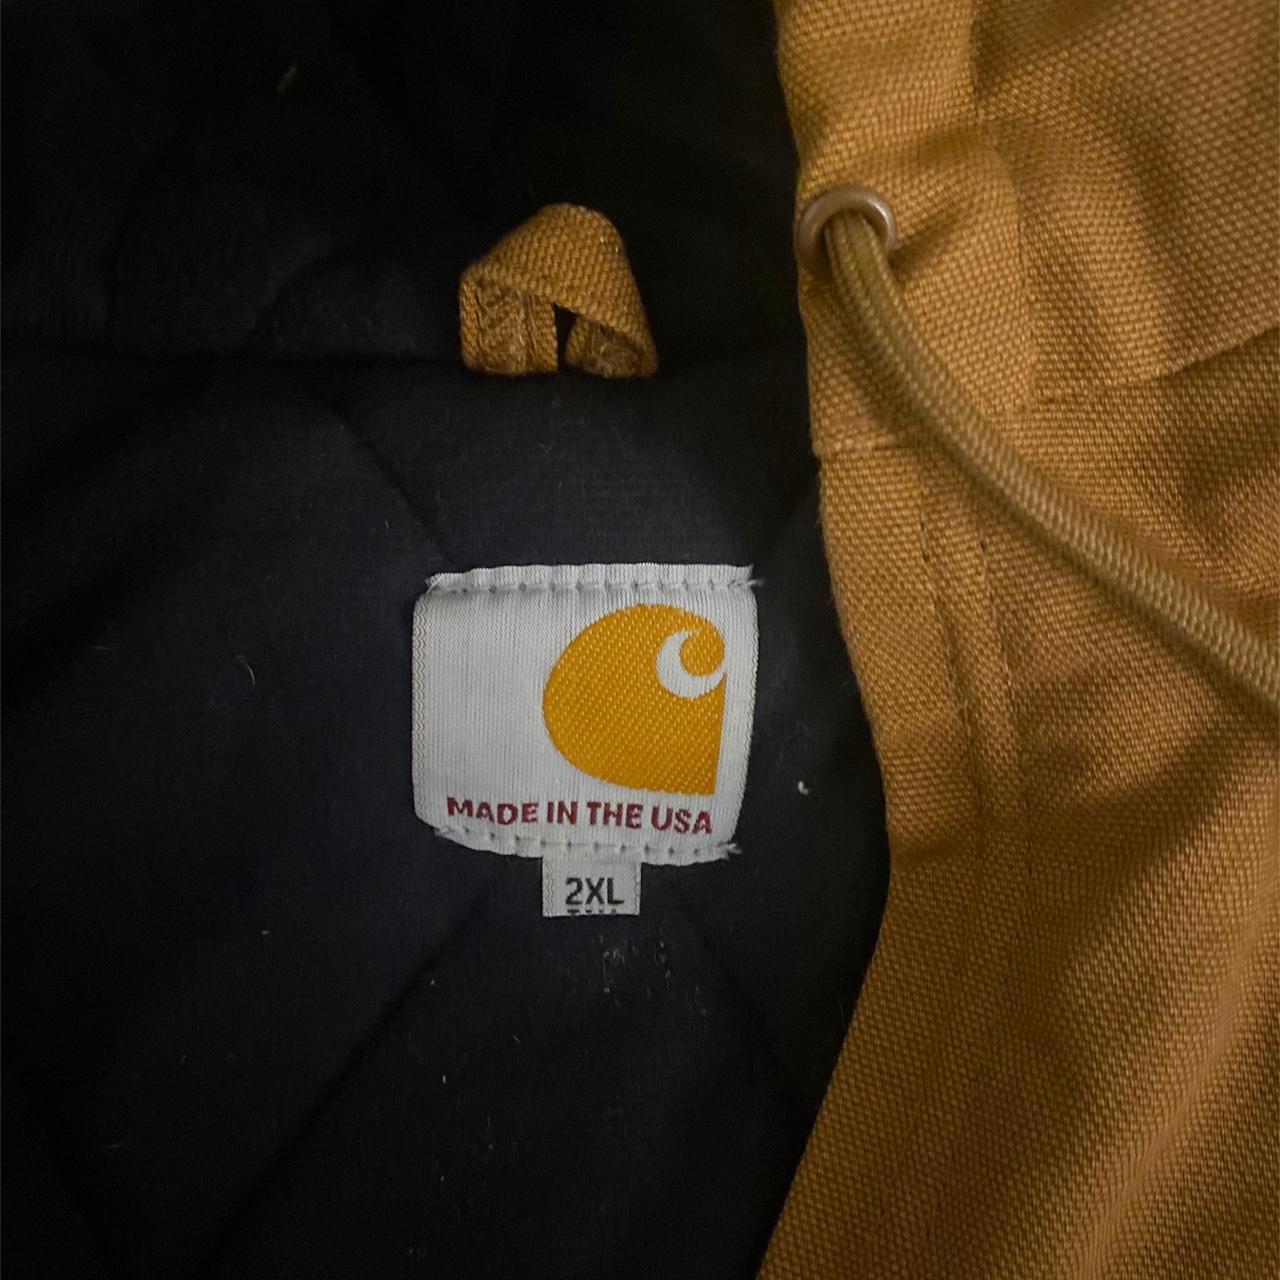 Made in the USA Carhartt Jacket Size 2XL in great... - Depop